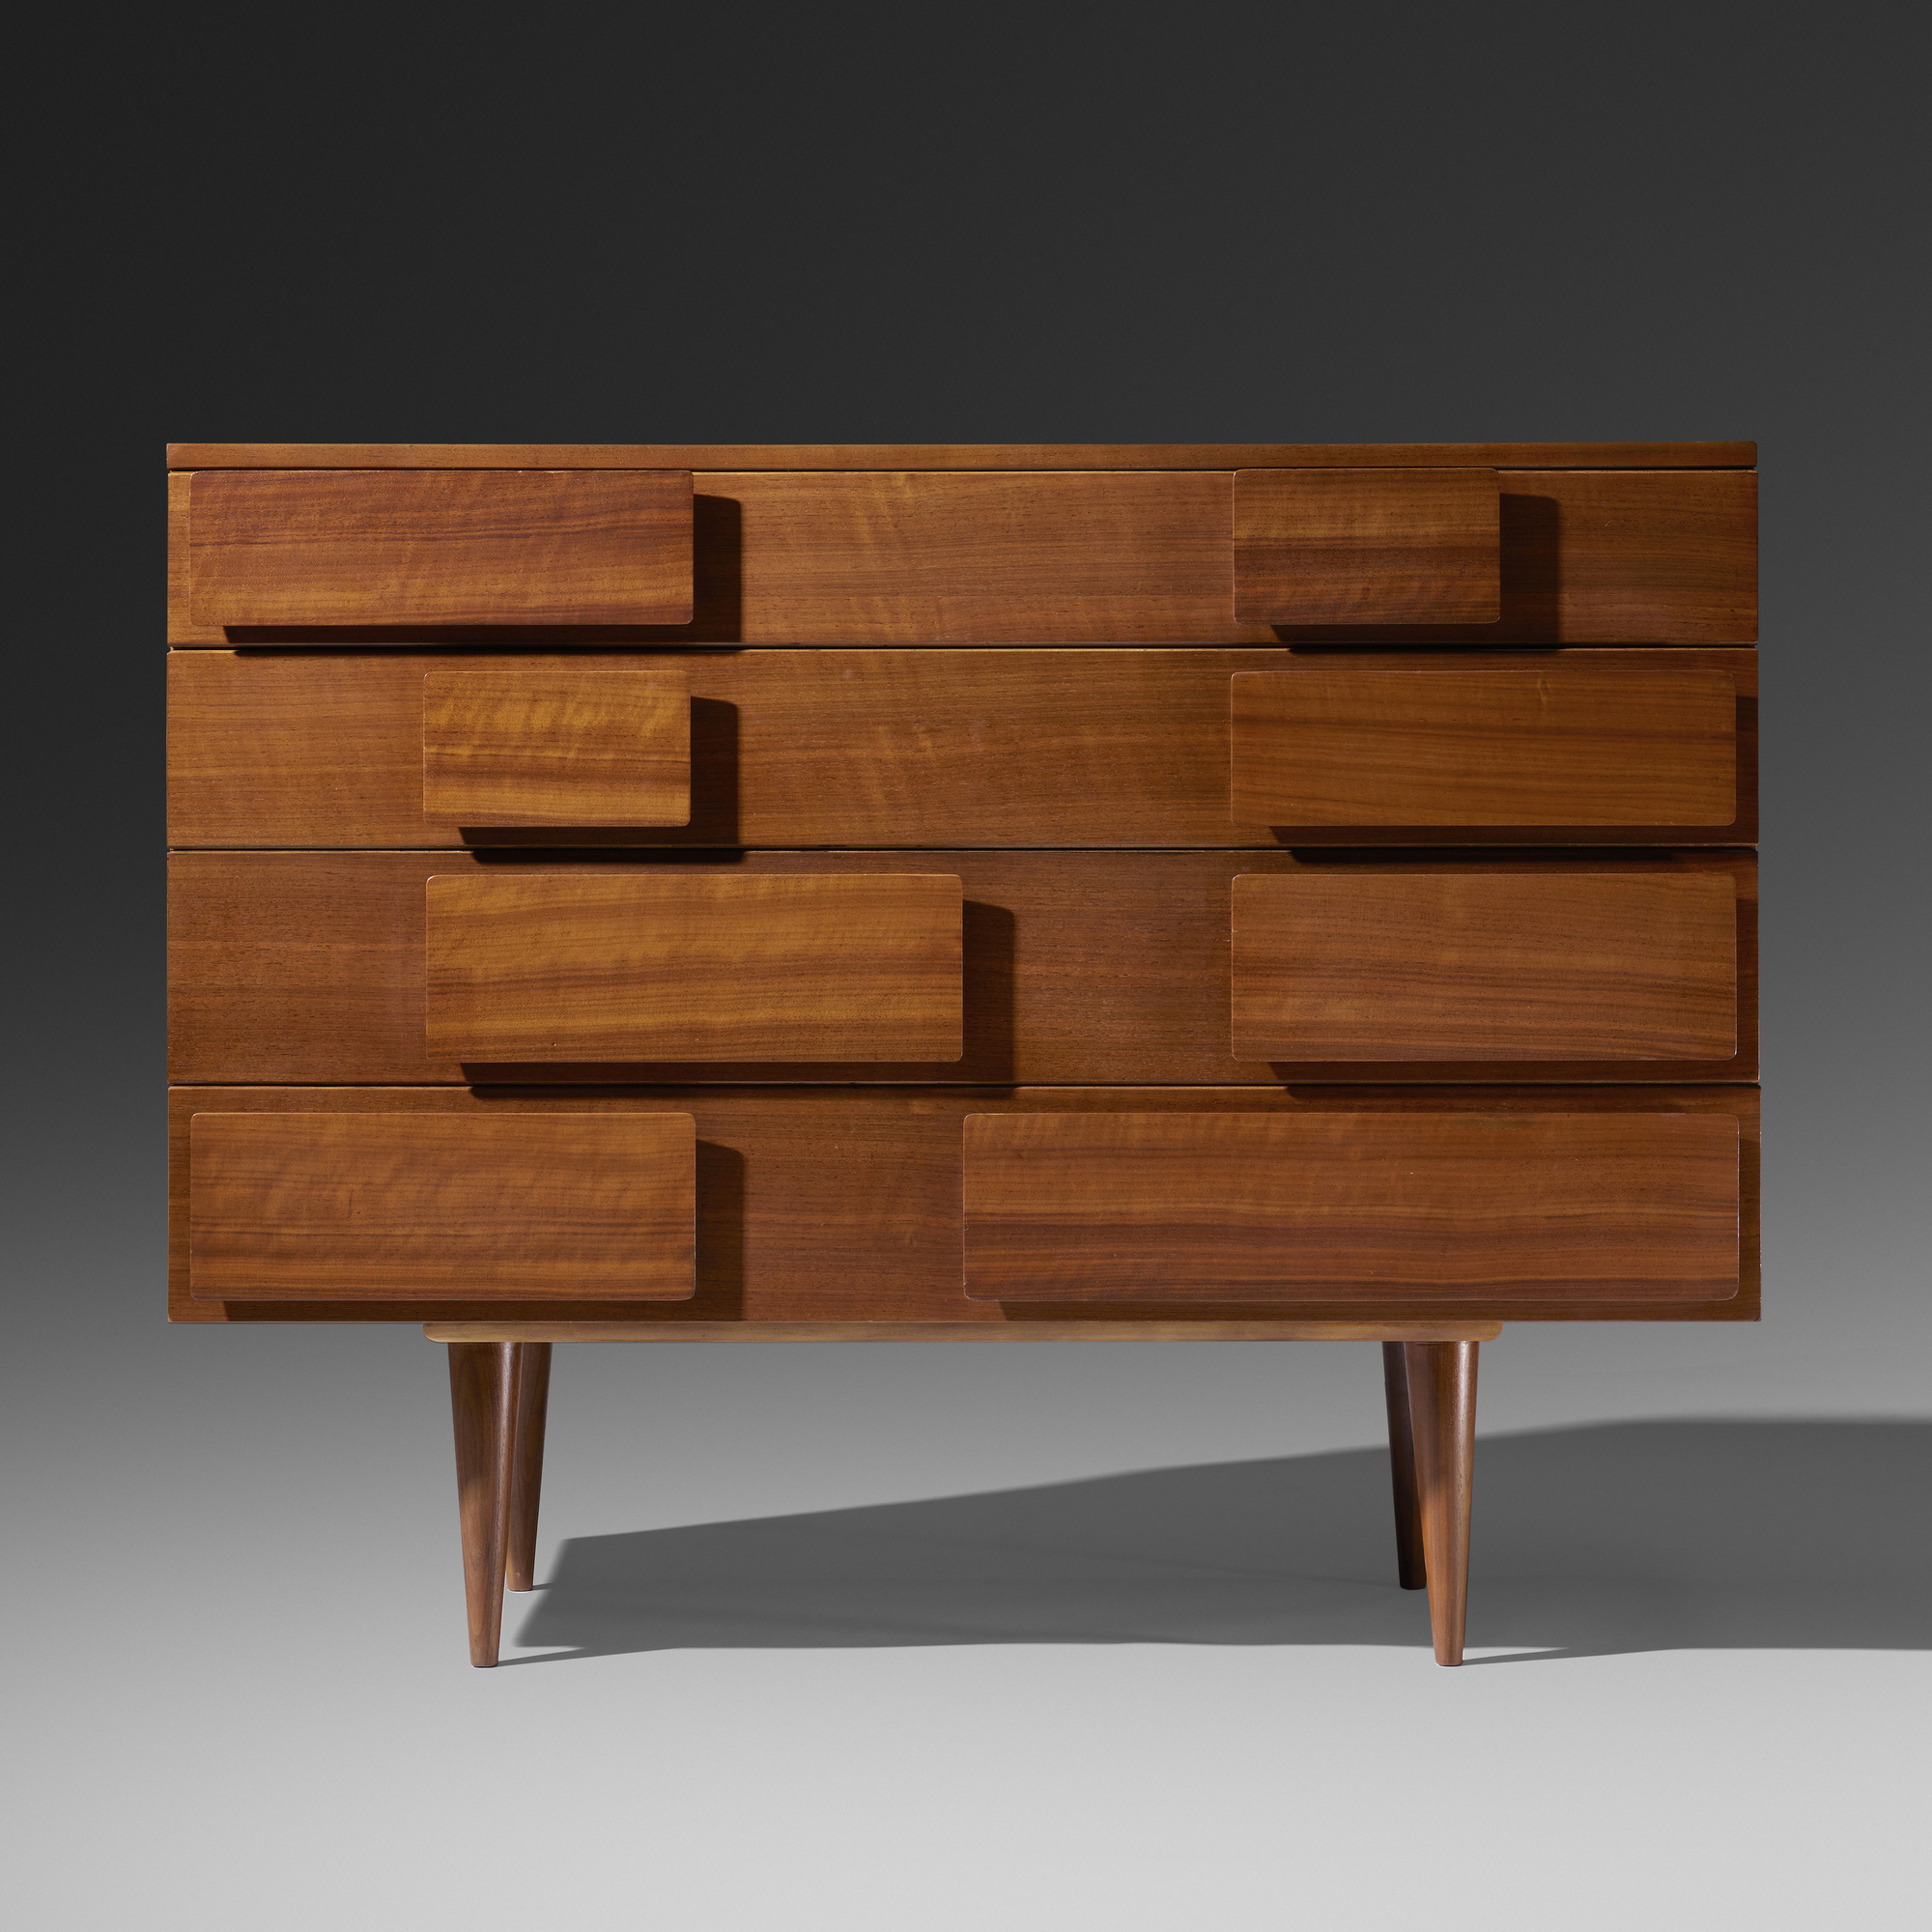 Gio Ponti, Cabinet for Singer & Sons, c. 1950, courtesy Rago/Wright.